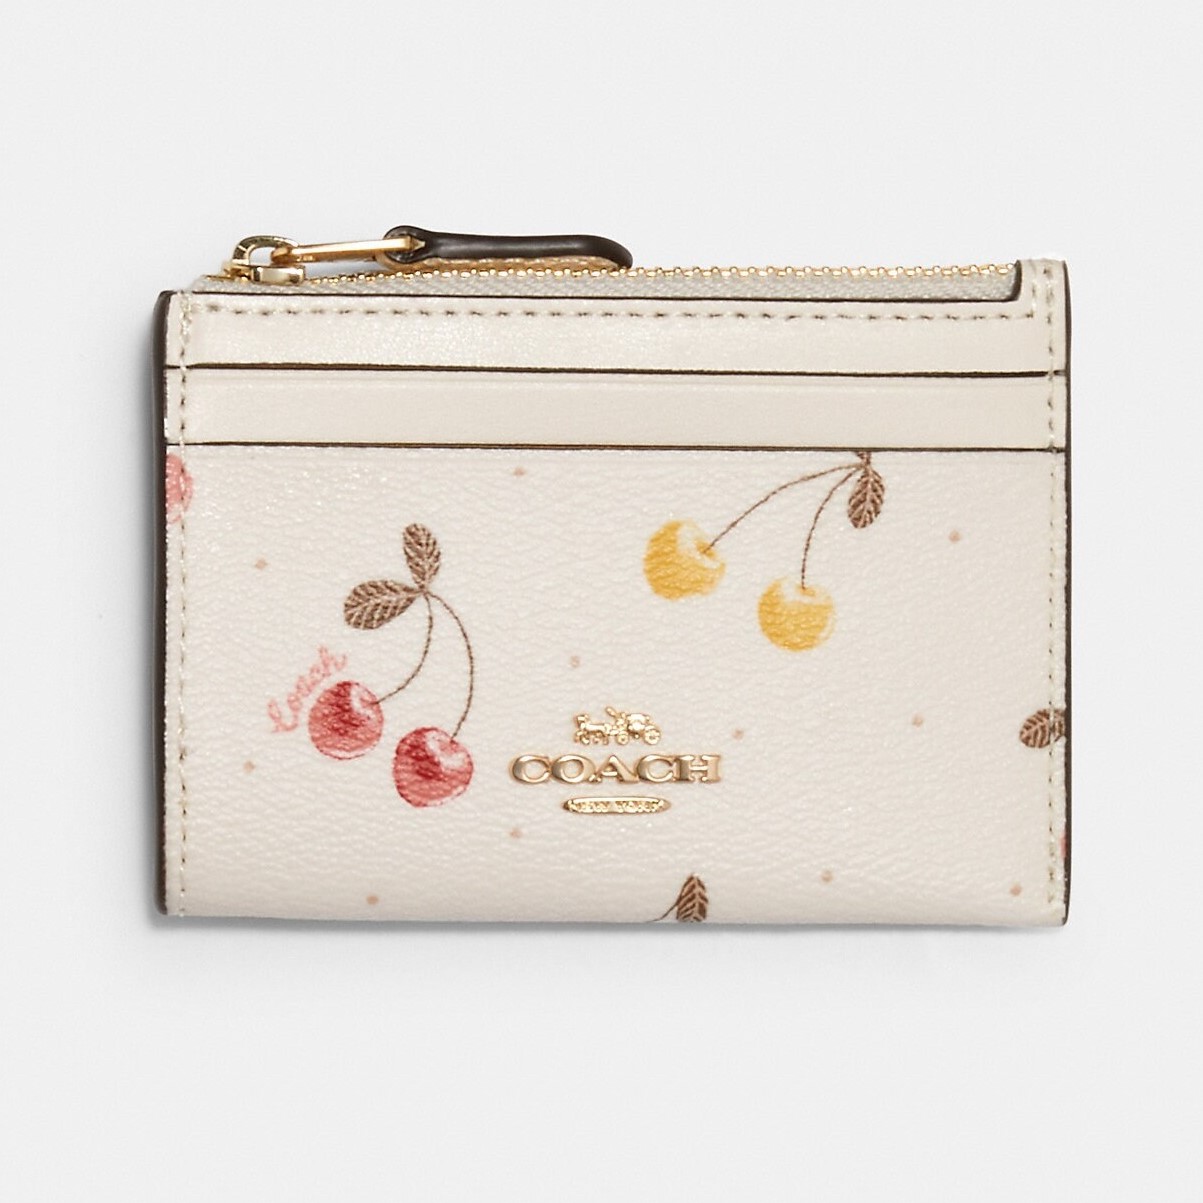 VÍ CARD COACH MINI SKINNY ID CASE WITH PAINTED CHERRY PRINT C1897 1